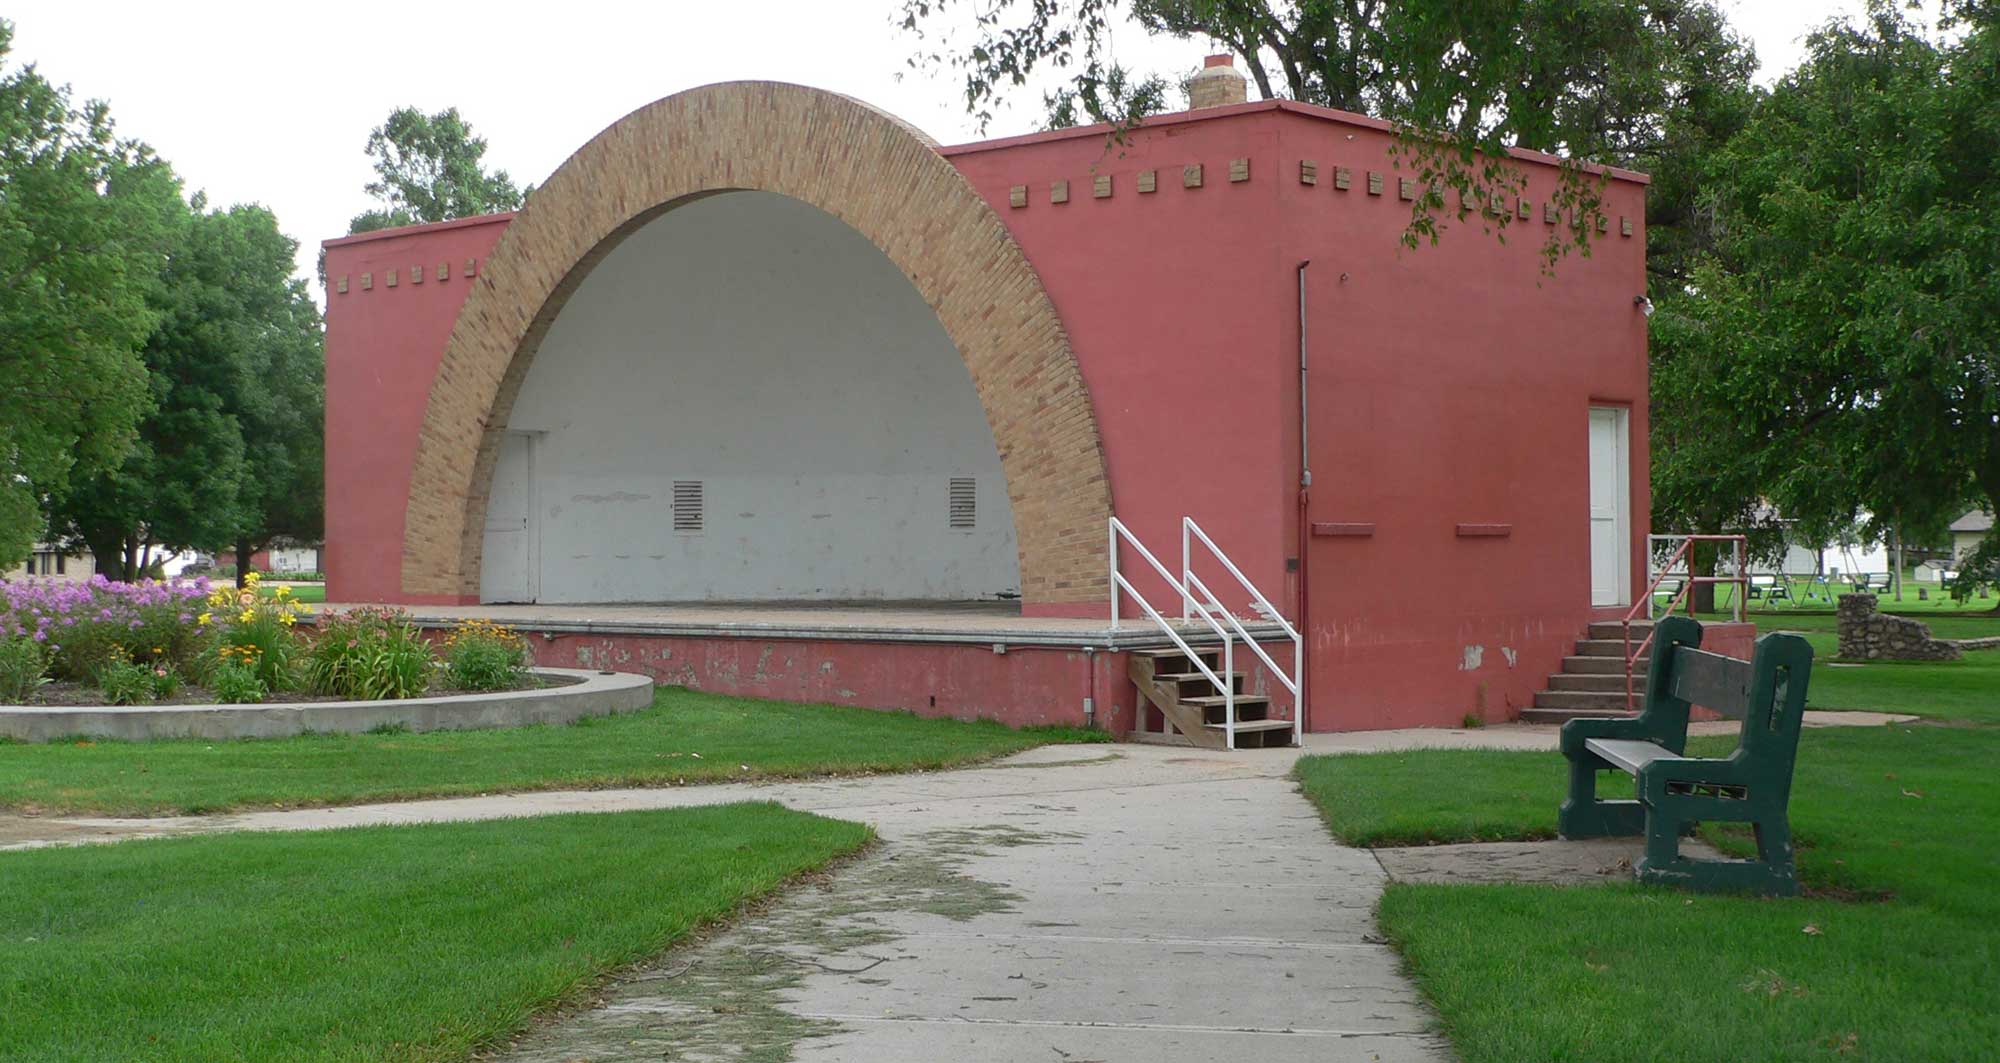 A bandshell in a small community park.